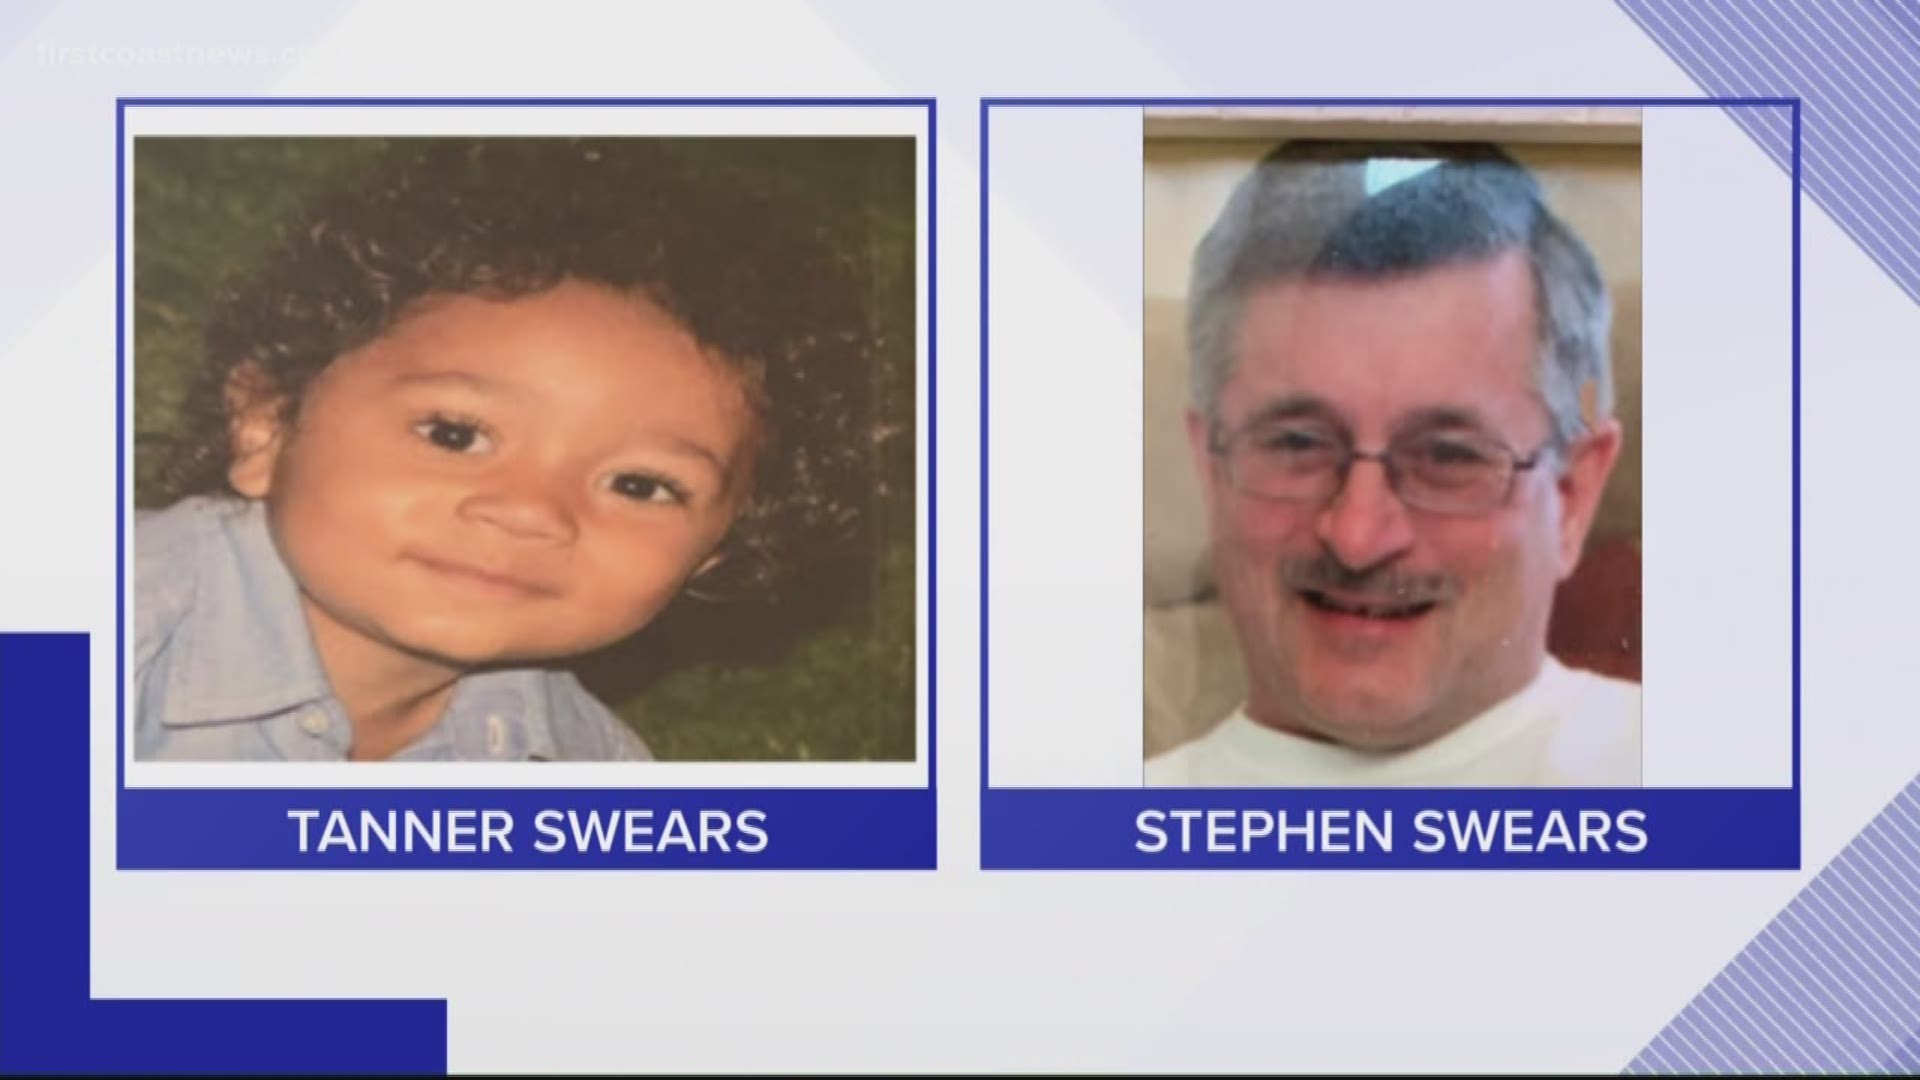 The Florida Department of Law Enforcement is searching for 4-year-old Tanner Swears from Broward County.